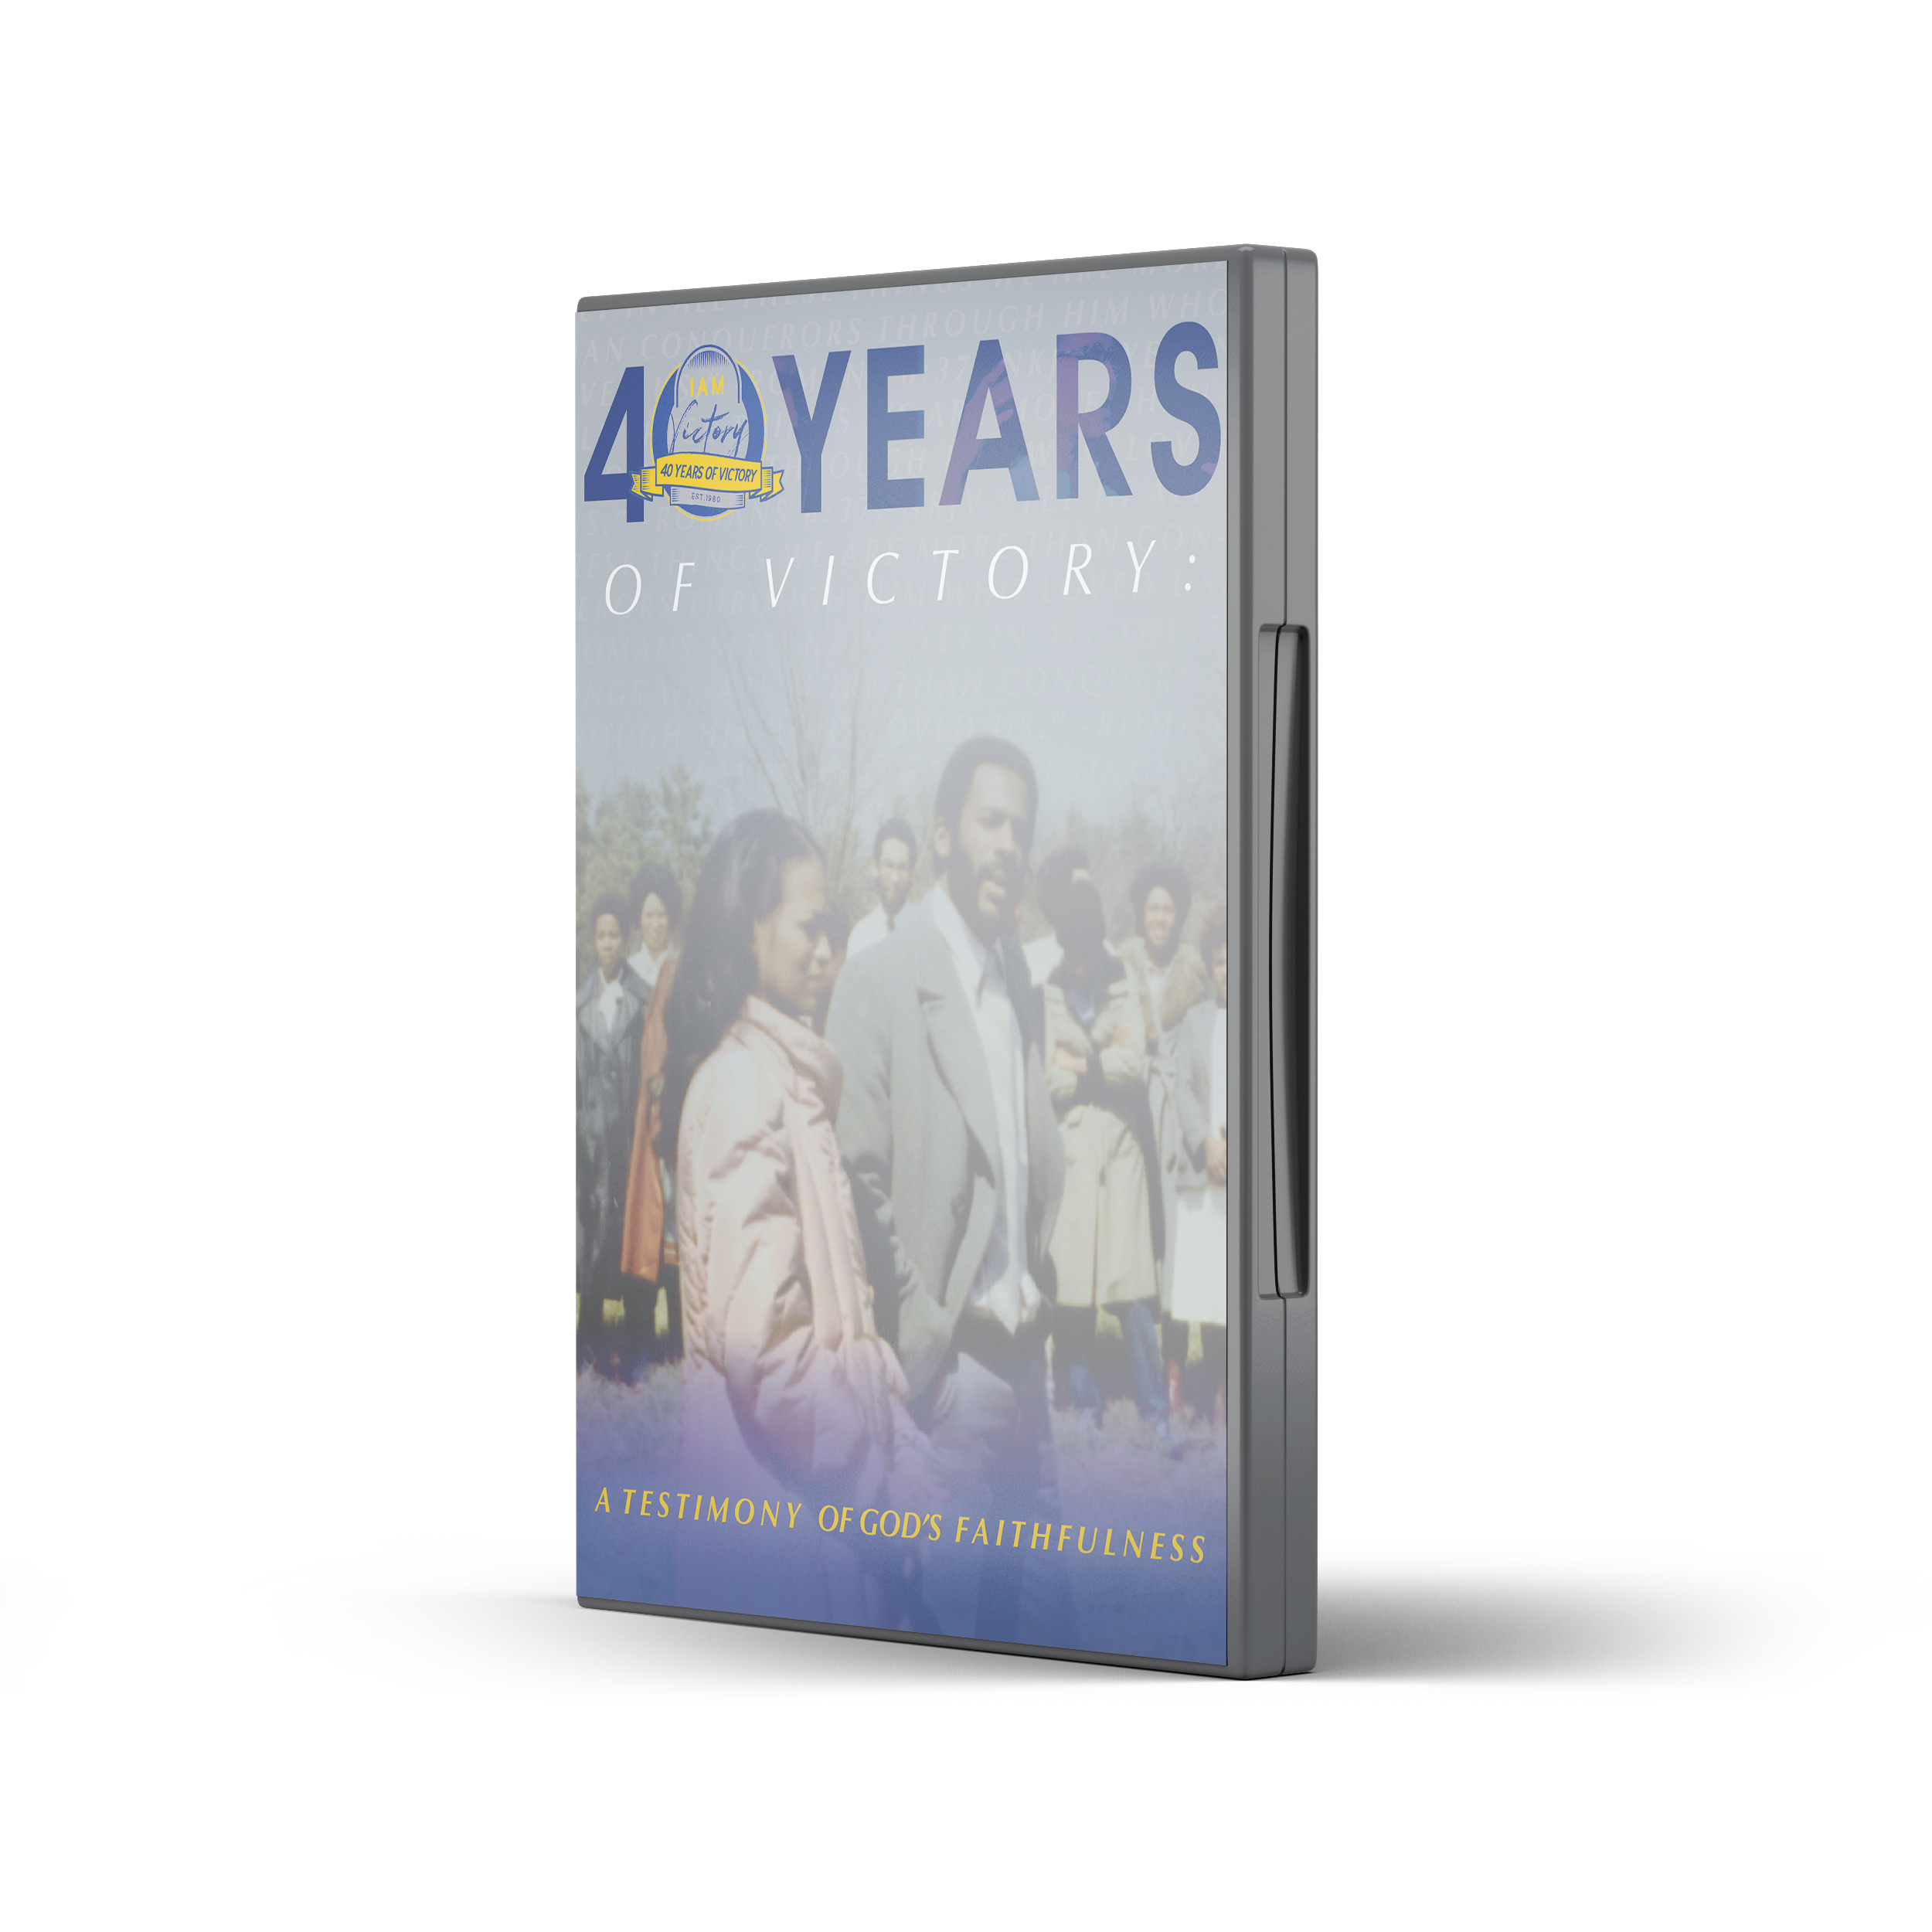 40 Years of Victory DVD Case Mock-Up.png